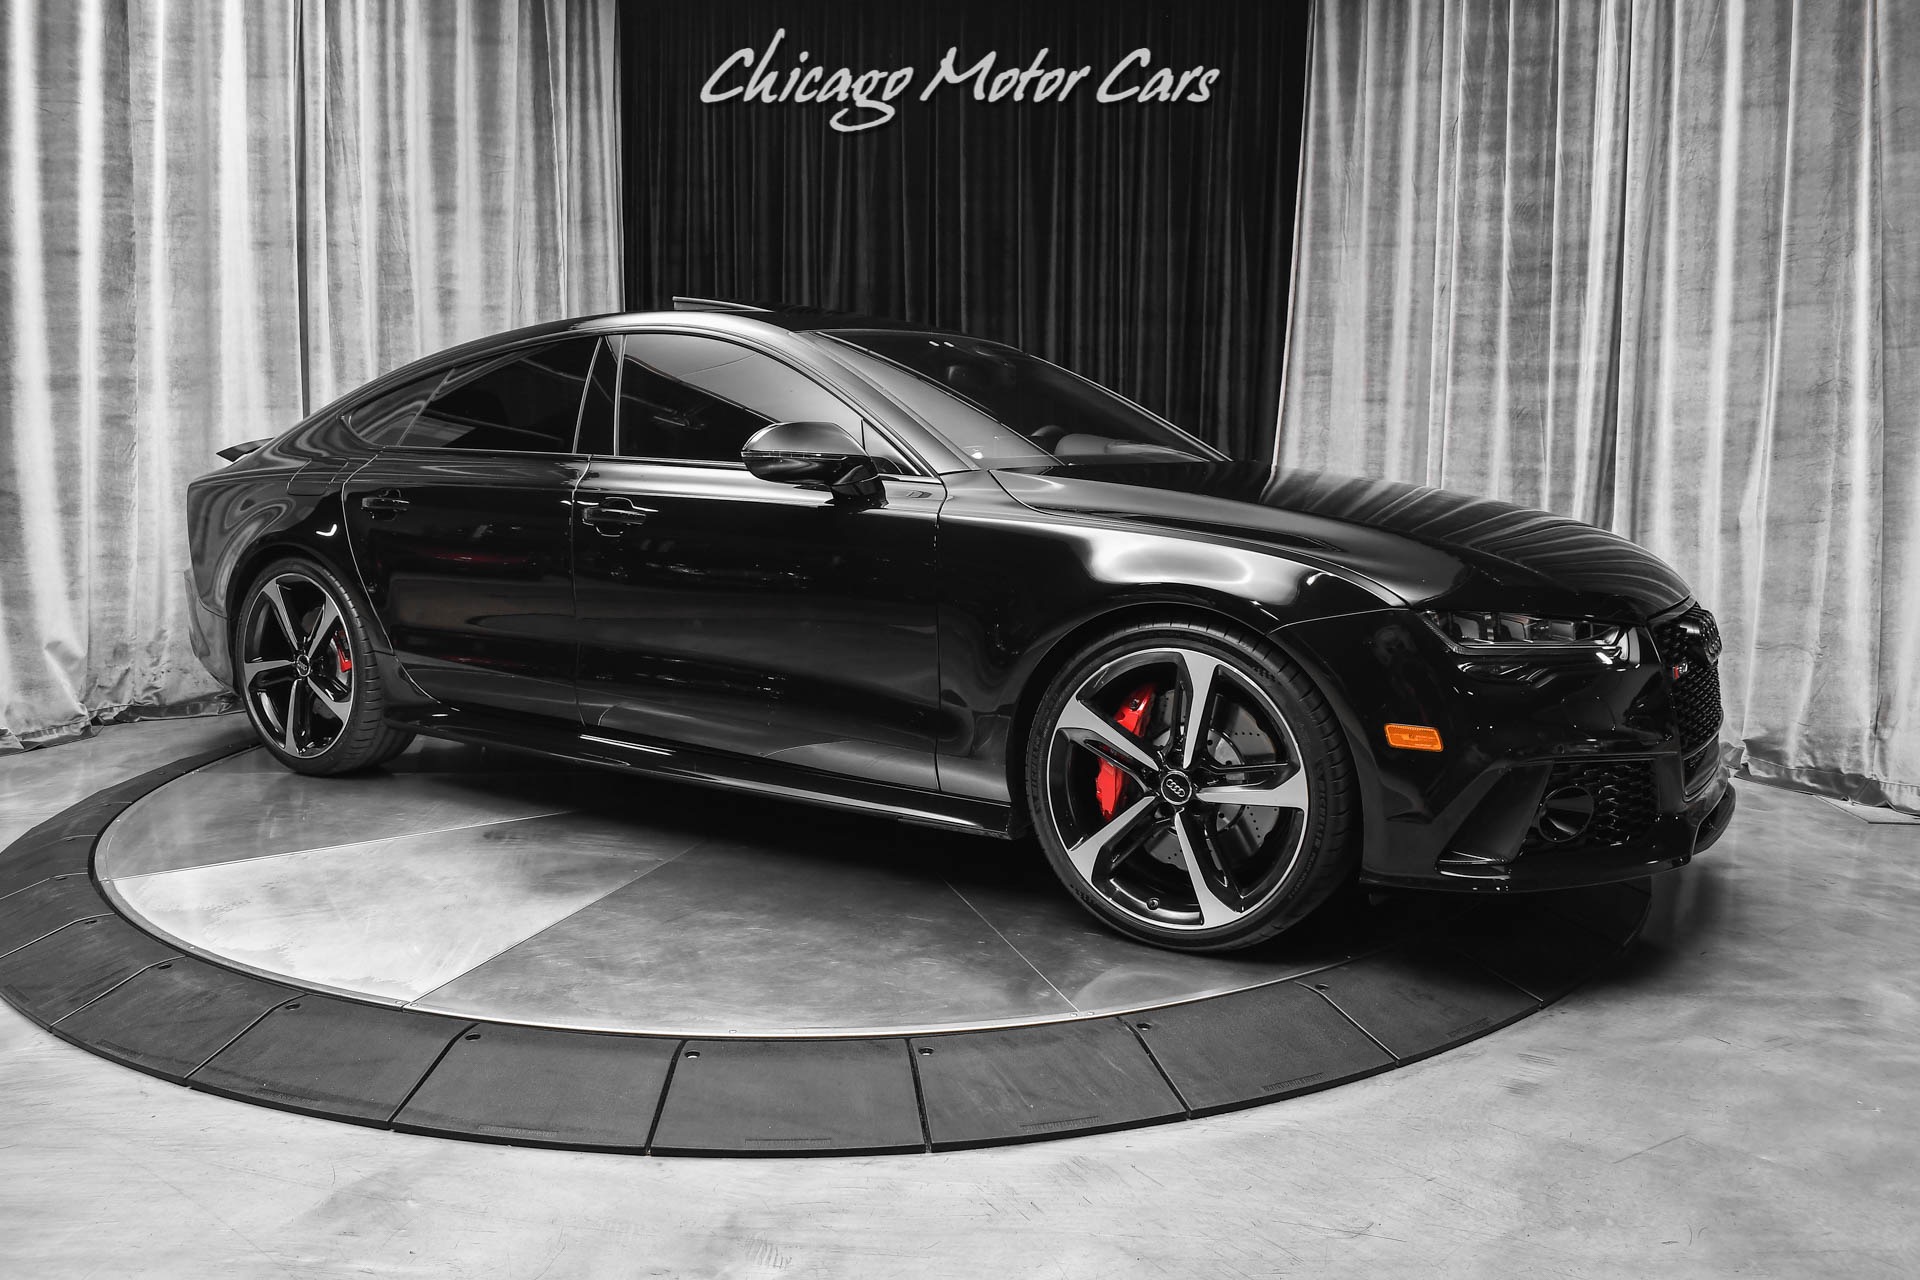 Used-2016-Audi-RS7-40T-Quattro-Prestige-MSRP-139900-Hard-LOADED-Audi-Exclusive-Package